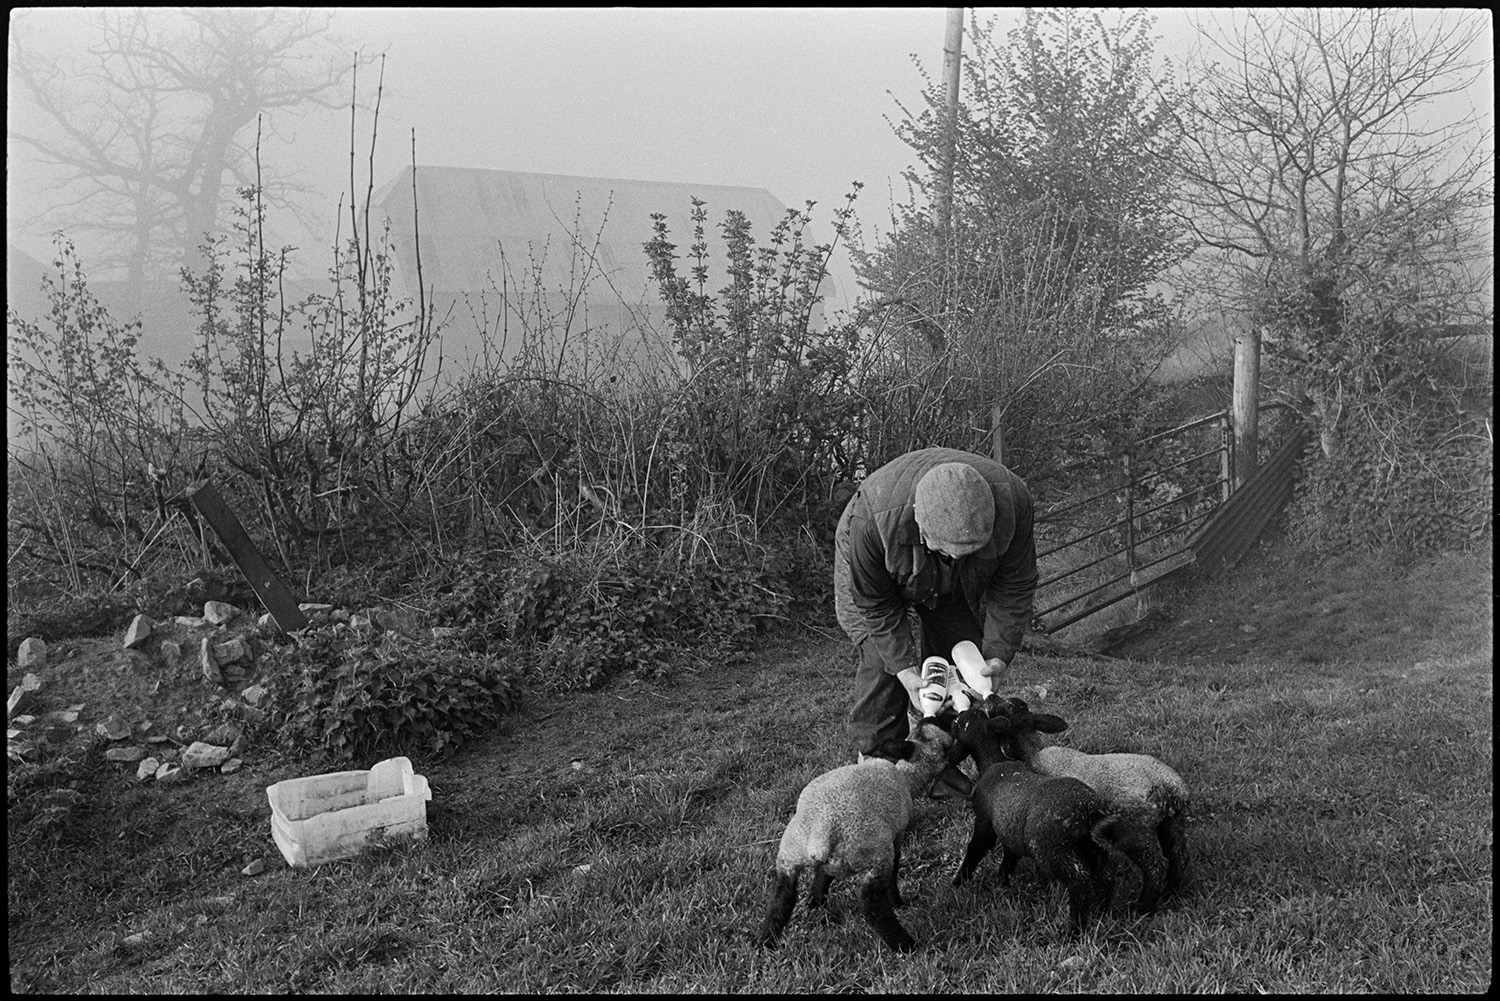 Shepherd feeding lambs beside cob and thatch barn.
[John Moyes bottle feeding three lambs in a field at Brookland Farm, Chulmleigh on a misty morning. A hedge, metal gate and a misty view of a barn are visible in the background.]